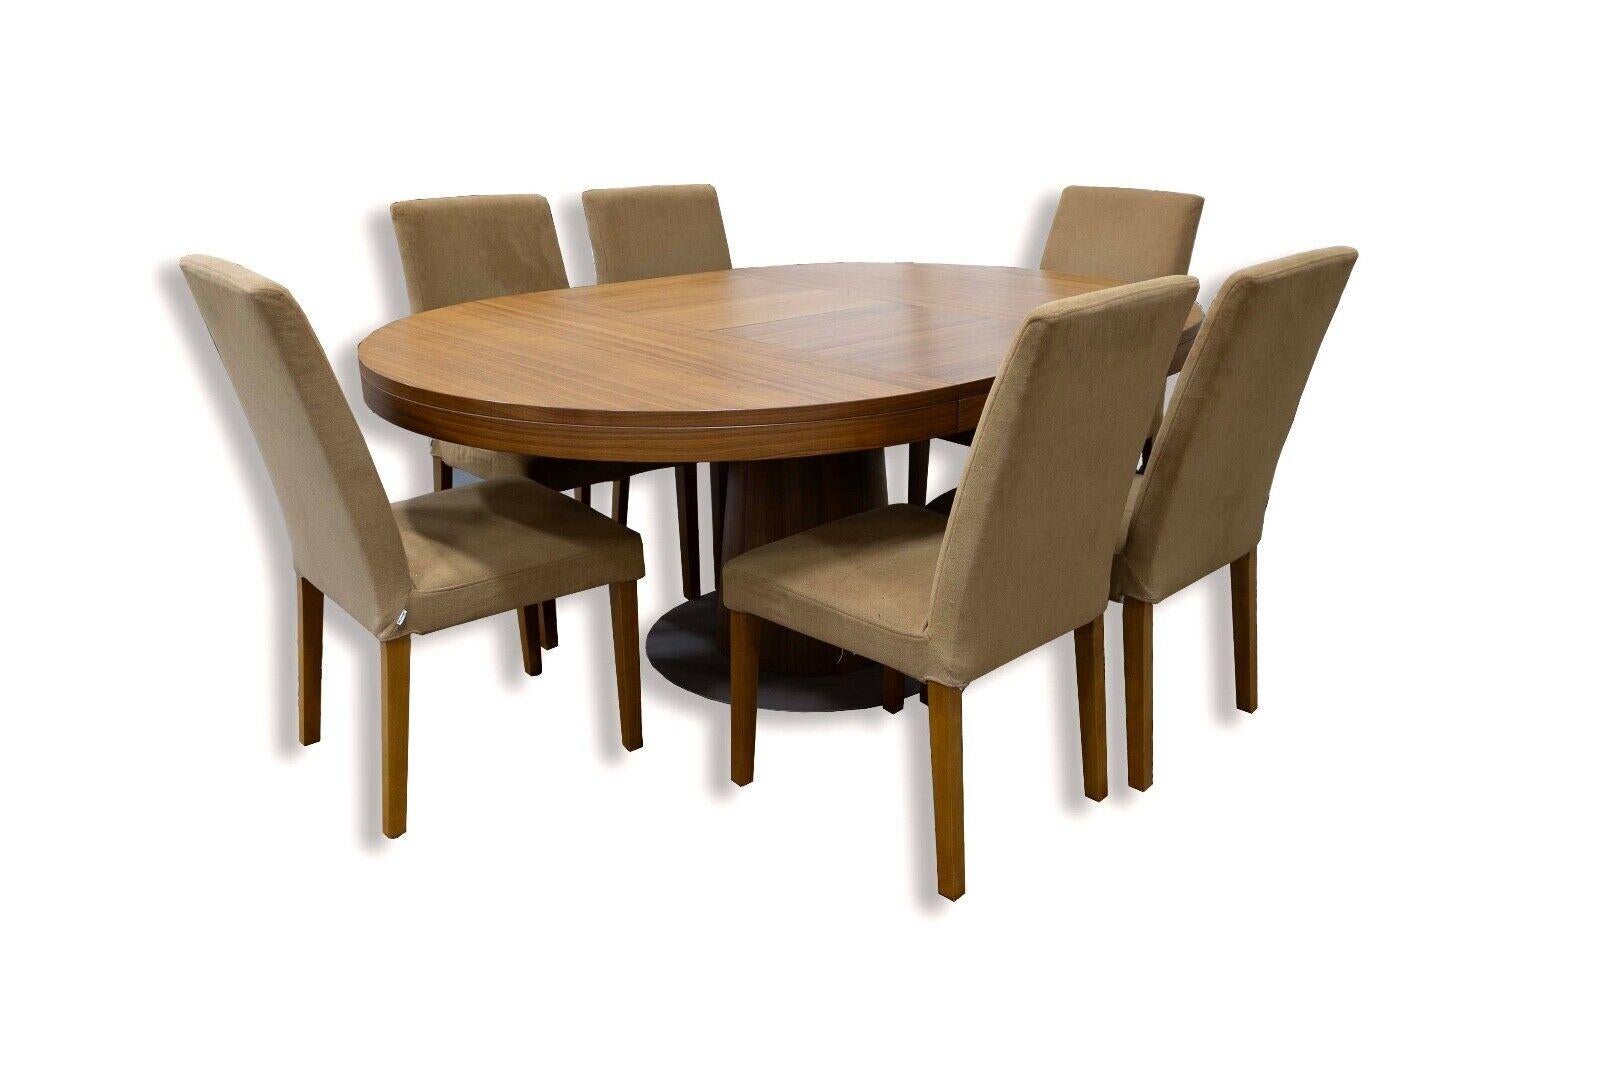 The BoConcepts Granada Model Expandable Dining Table and 6 Chairs embody contemporary elegance and versatility in dining furniture. The walnut wood table features a sleek, minimalist design with a beautifully finished tabletop that extends to